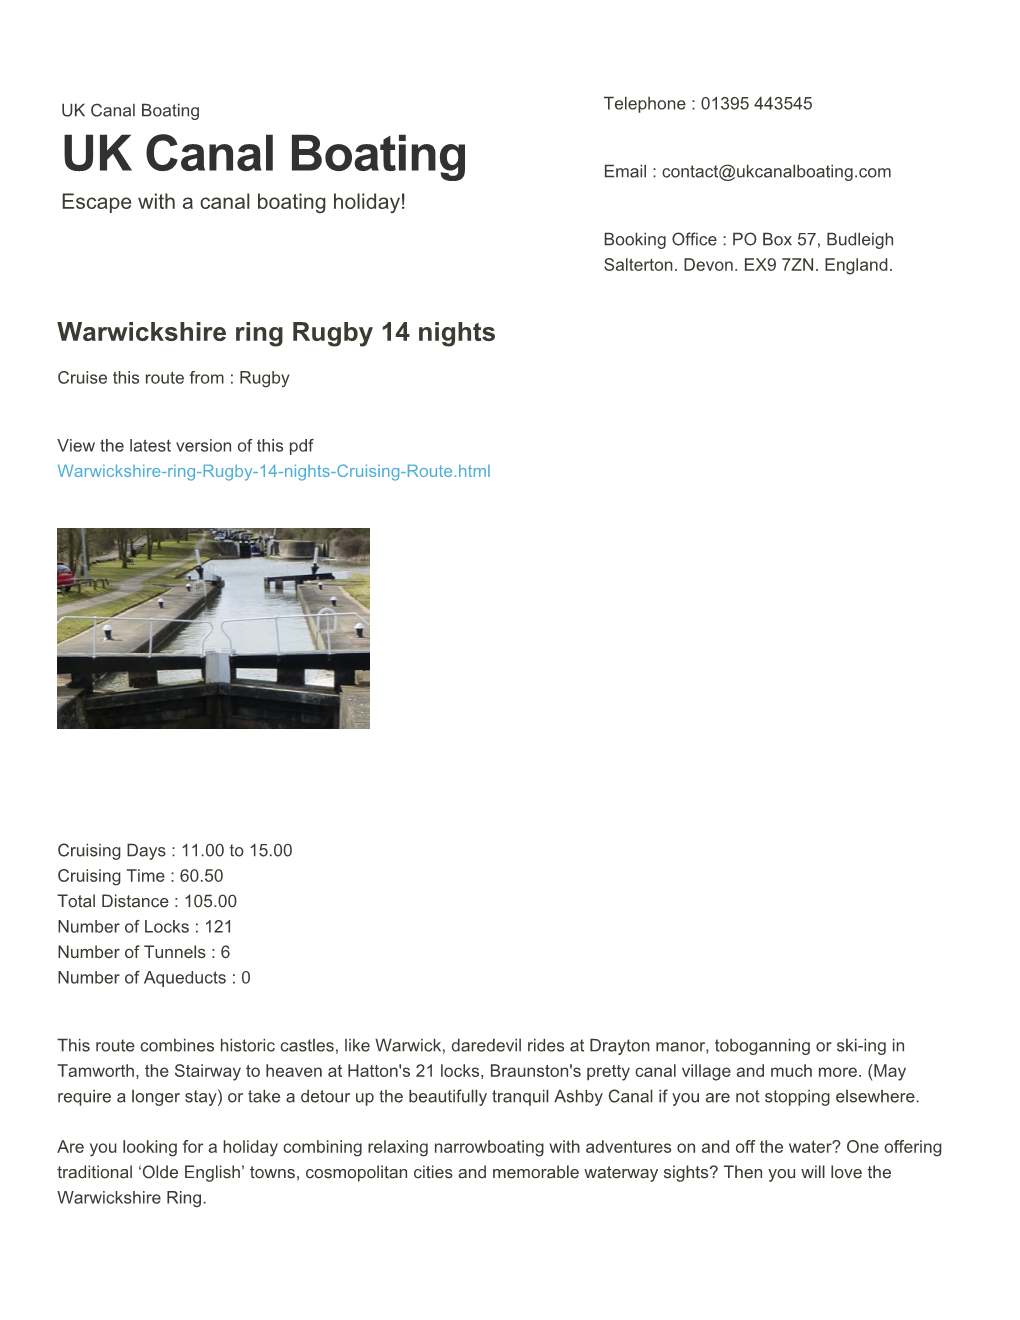 Warwickshire Ring Rugby 14 Nights | UK Canal Boating